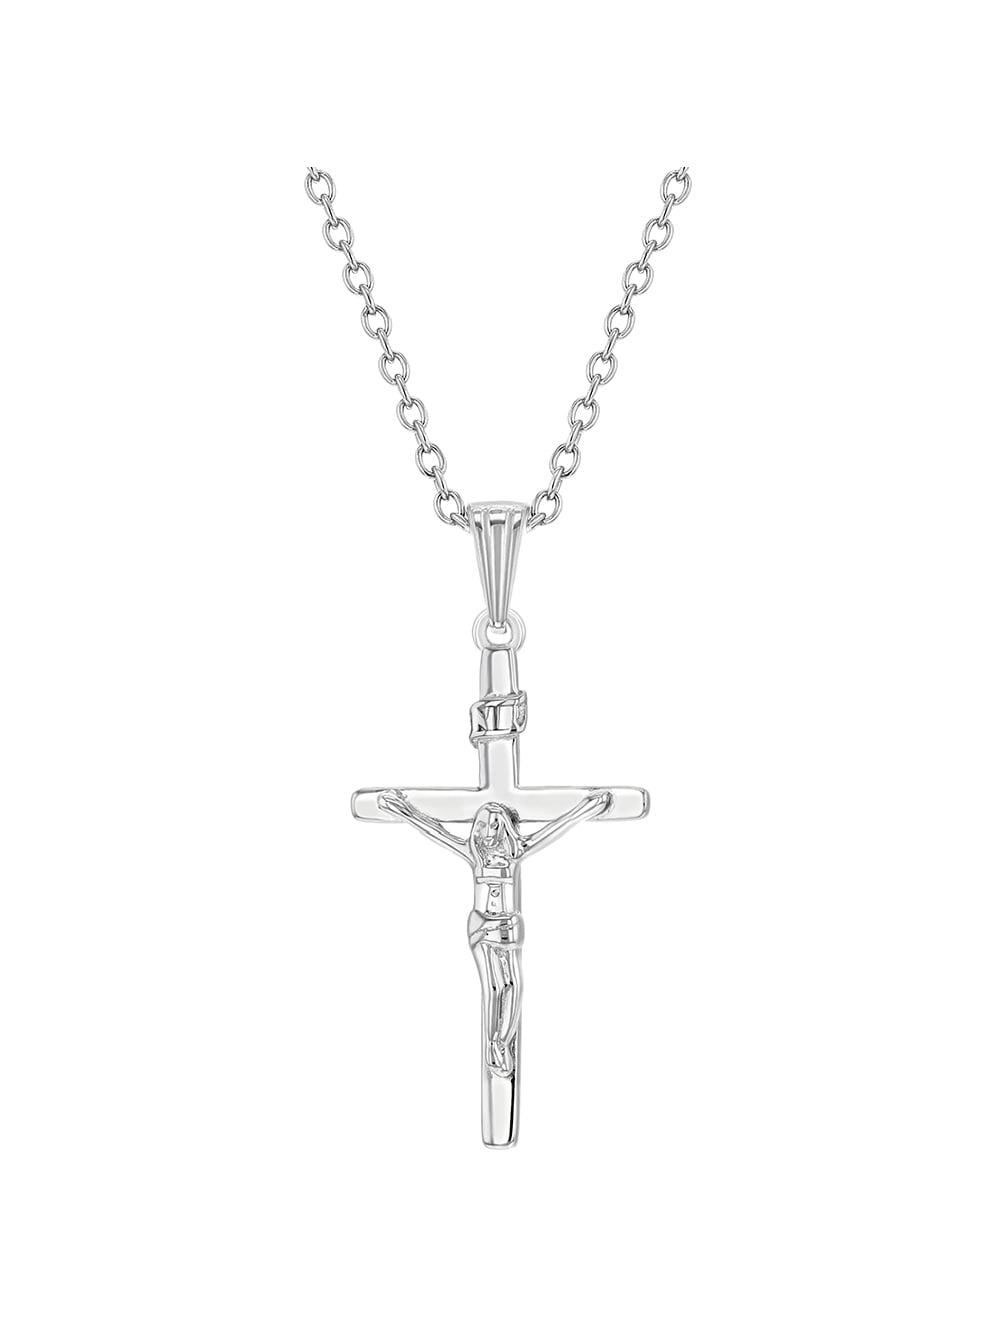 925 Classic Crucifix Charm Large Sterling Silver Cross Pendant 1 1/4" Length 